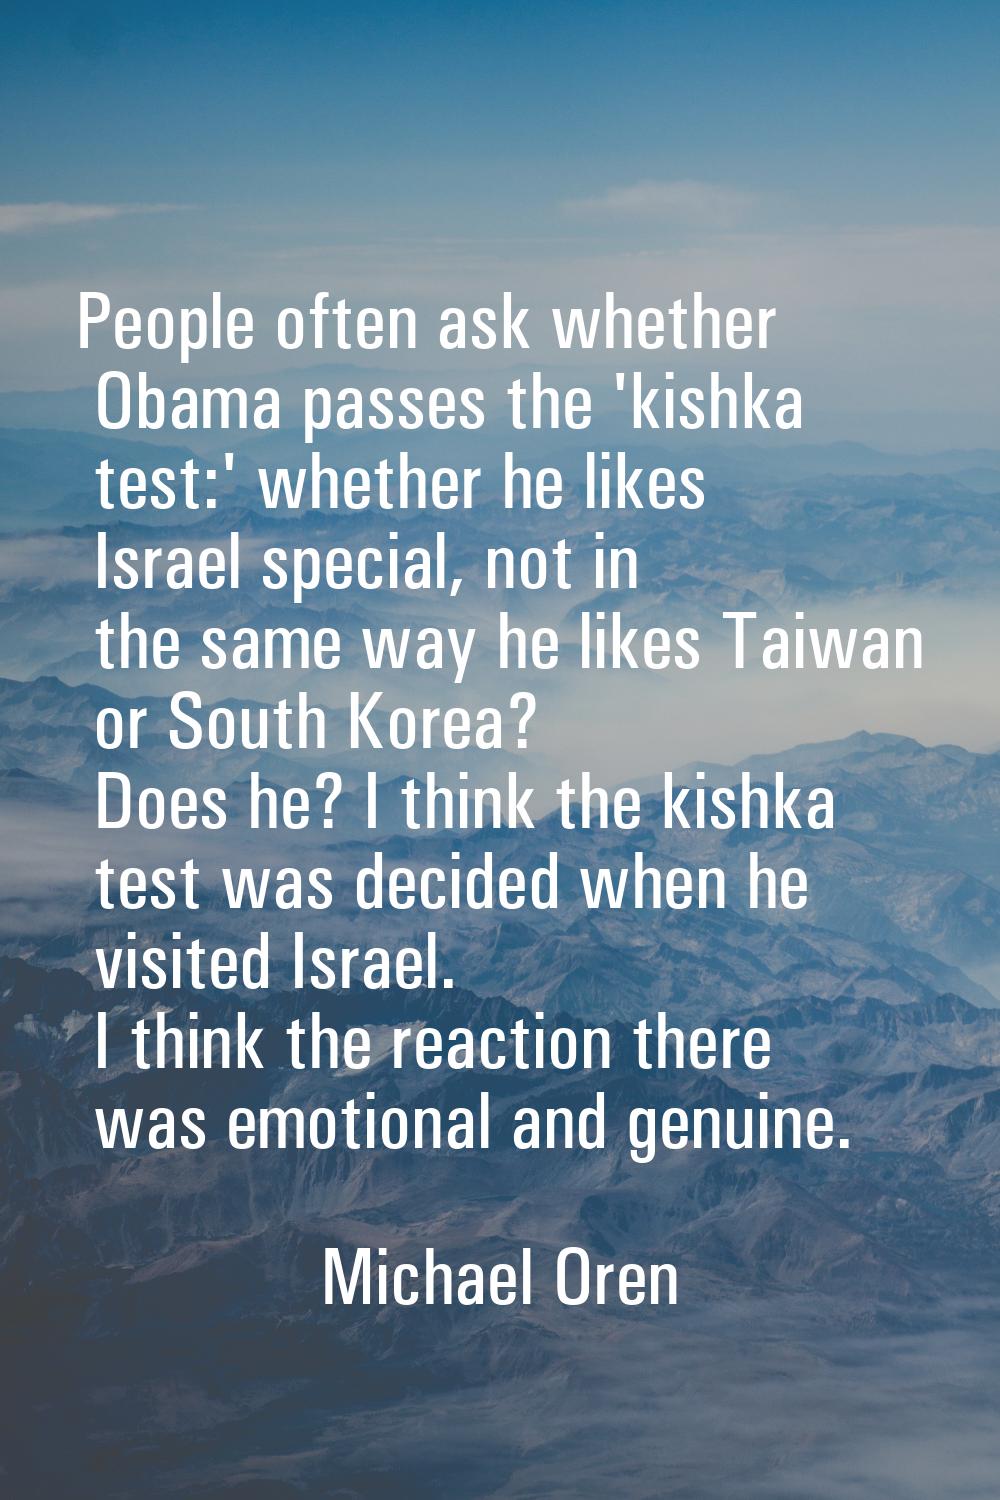 People often ask whether Obama passes the 'kishka test:' whether he likes Israel special, not in th